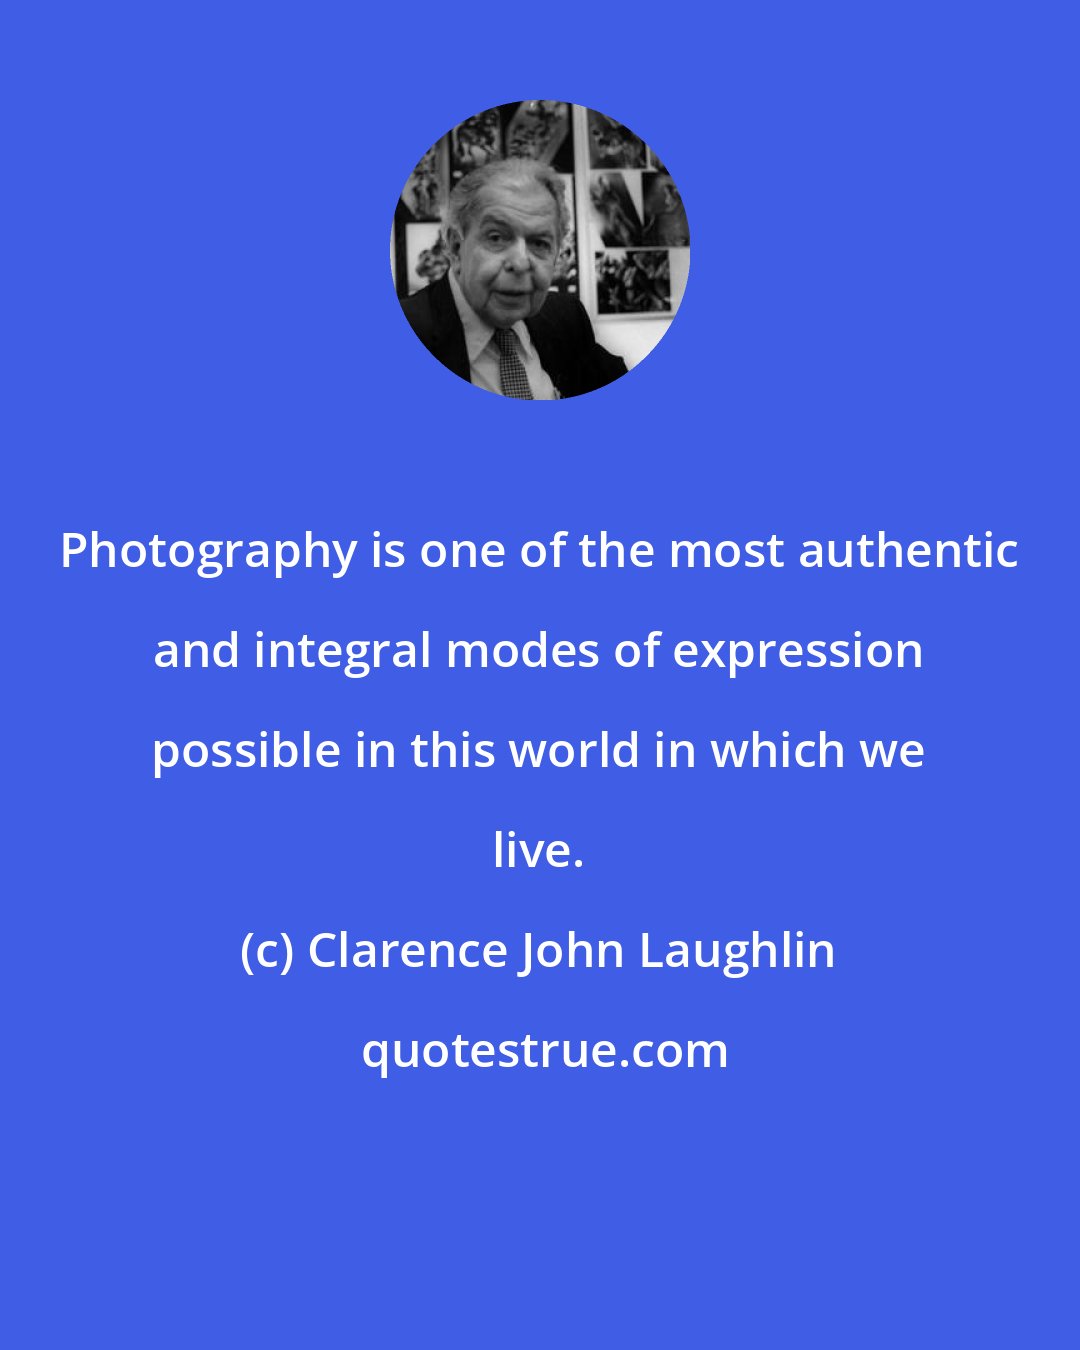 Clarence John Laughlin: Photography is one of the most authentic and integral modes of expression possible in this world in which we live.